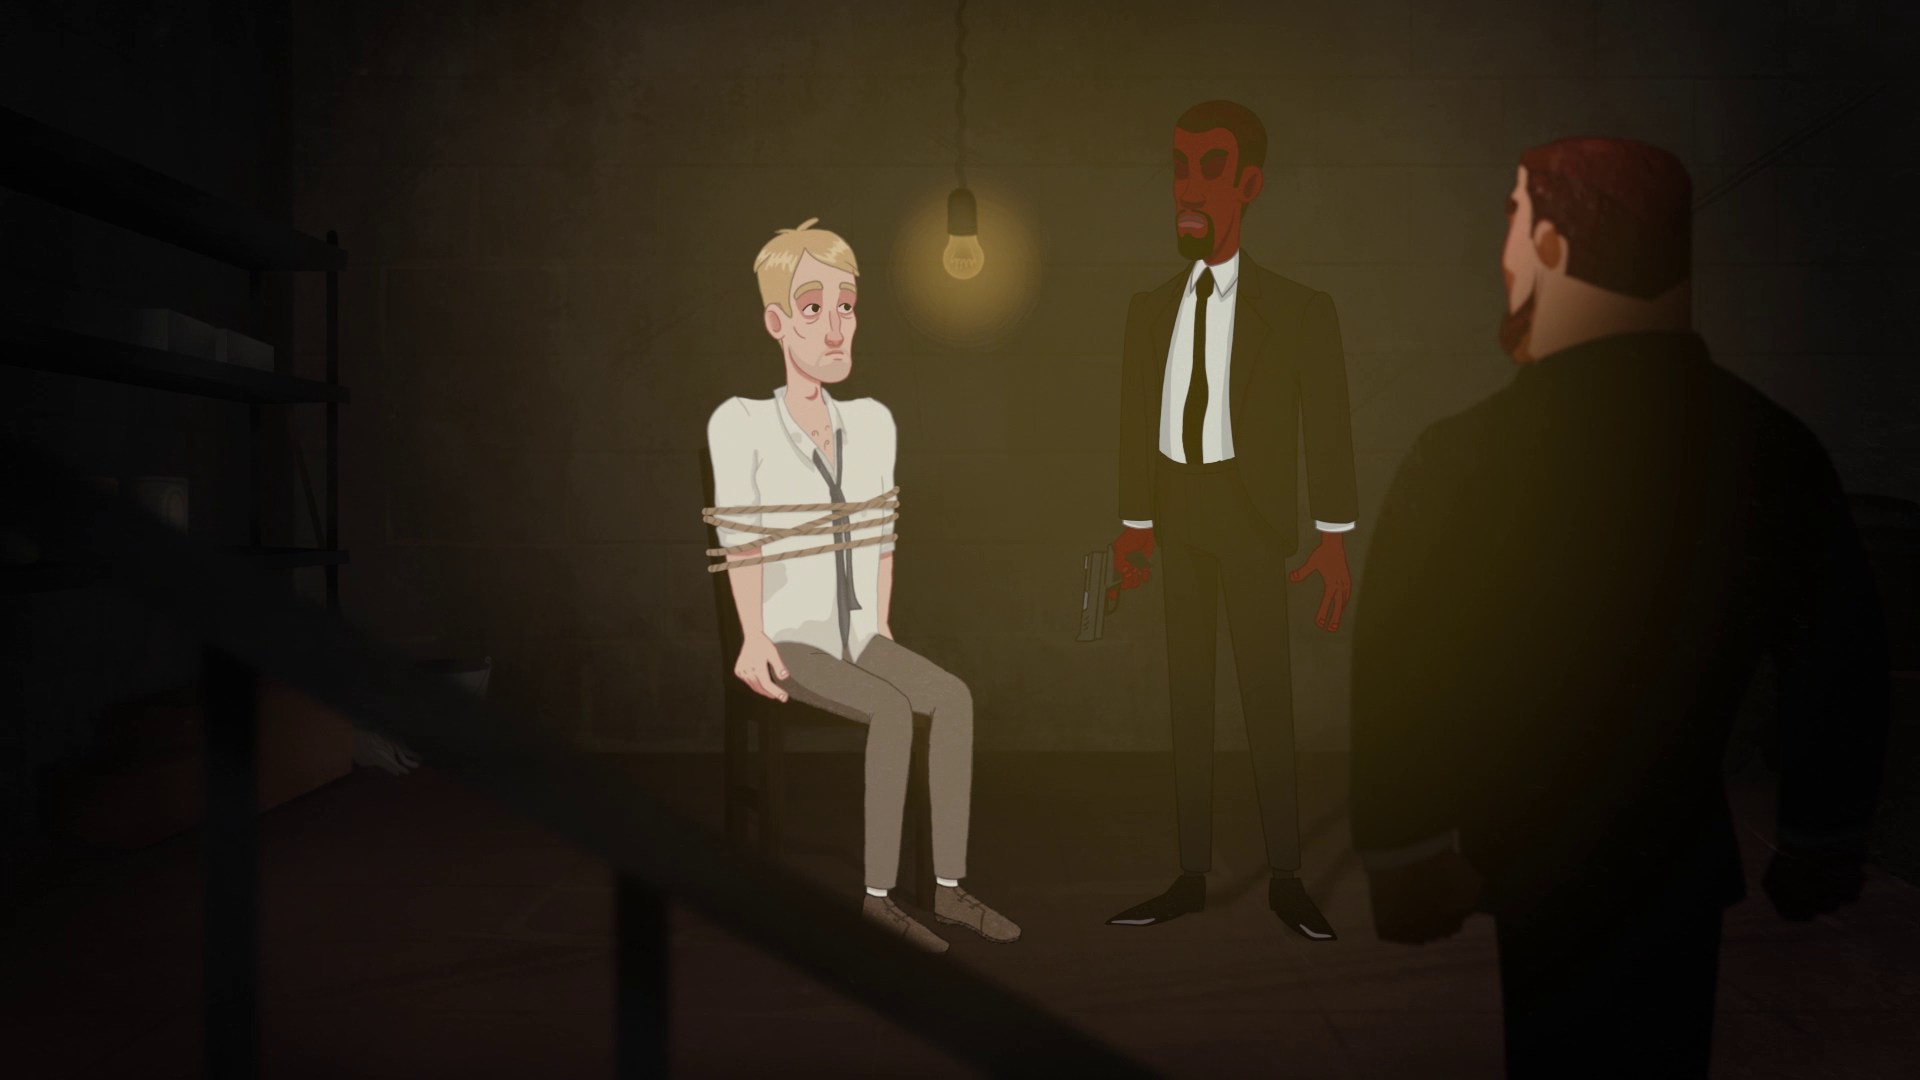 Hostage - 2D Animated Video